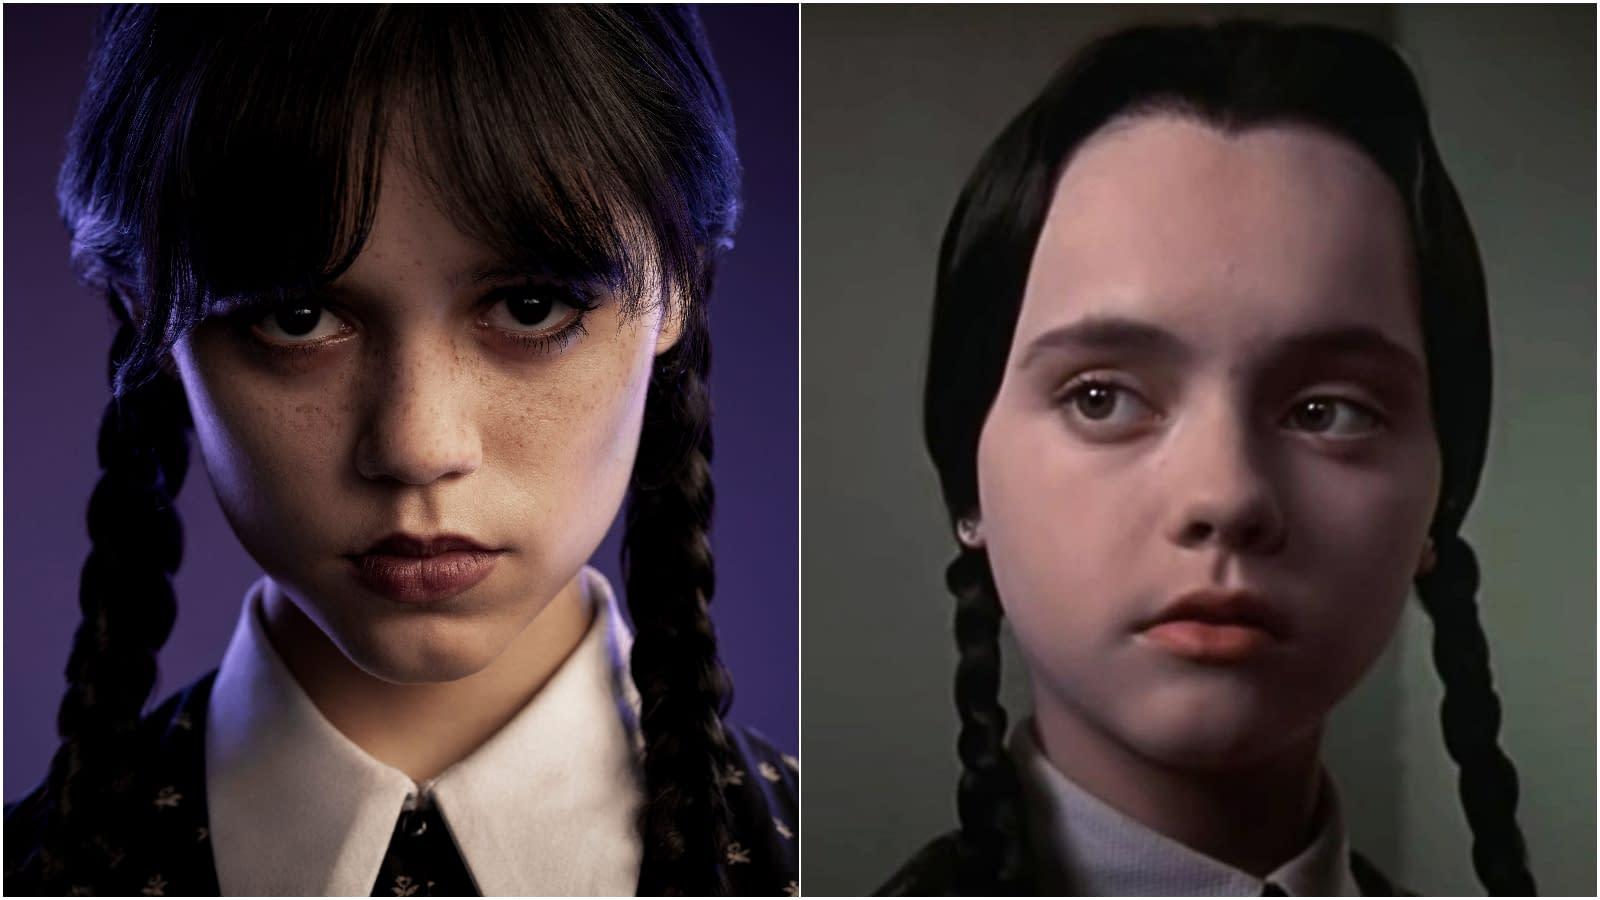 Christina Ricci casting in Netflix Wednesday Addams reboot divides fans:  'Nostalgia casting is cheap and lame